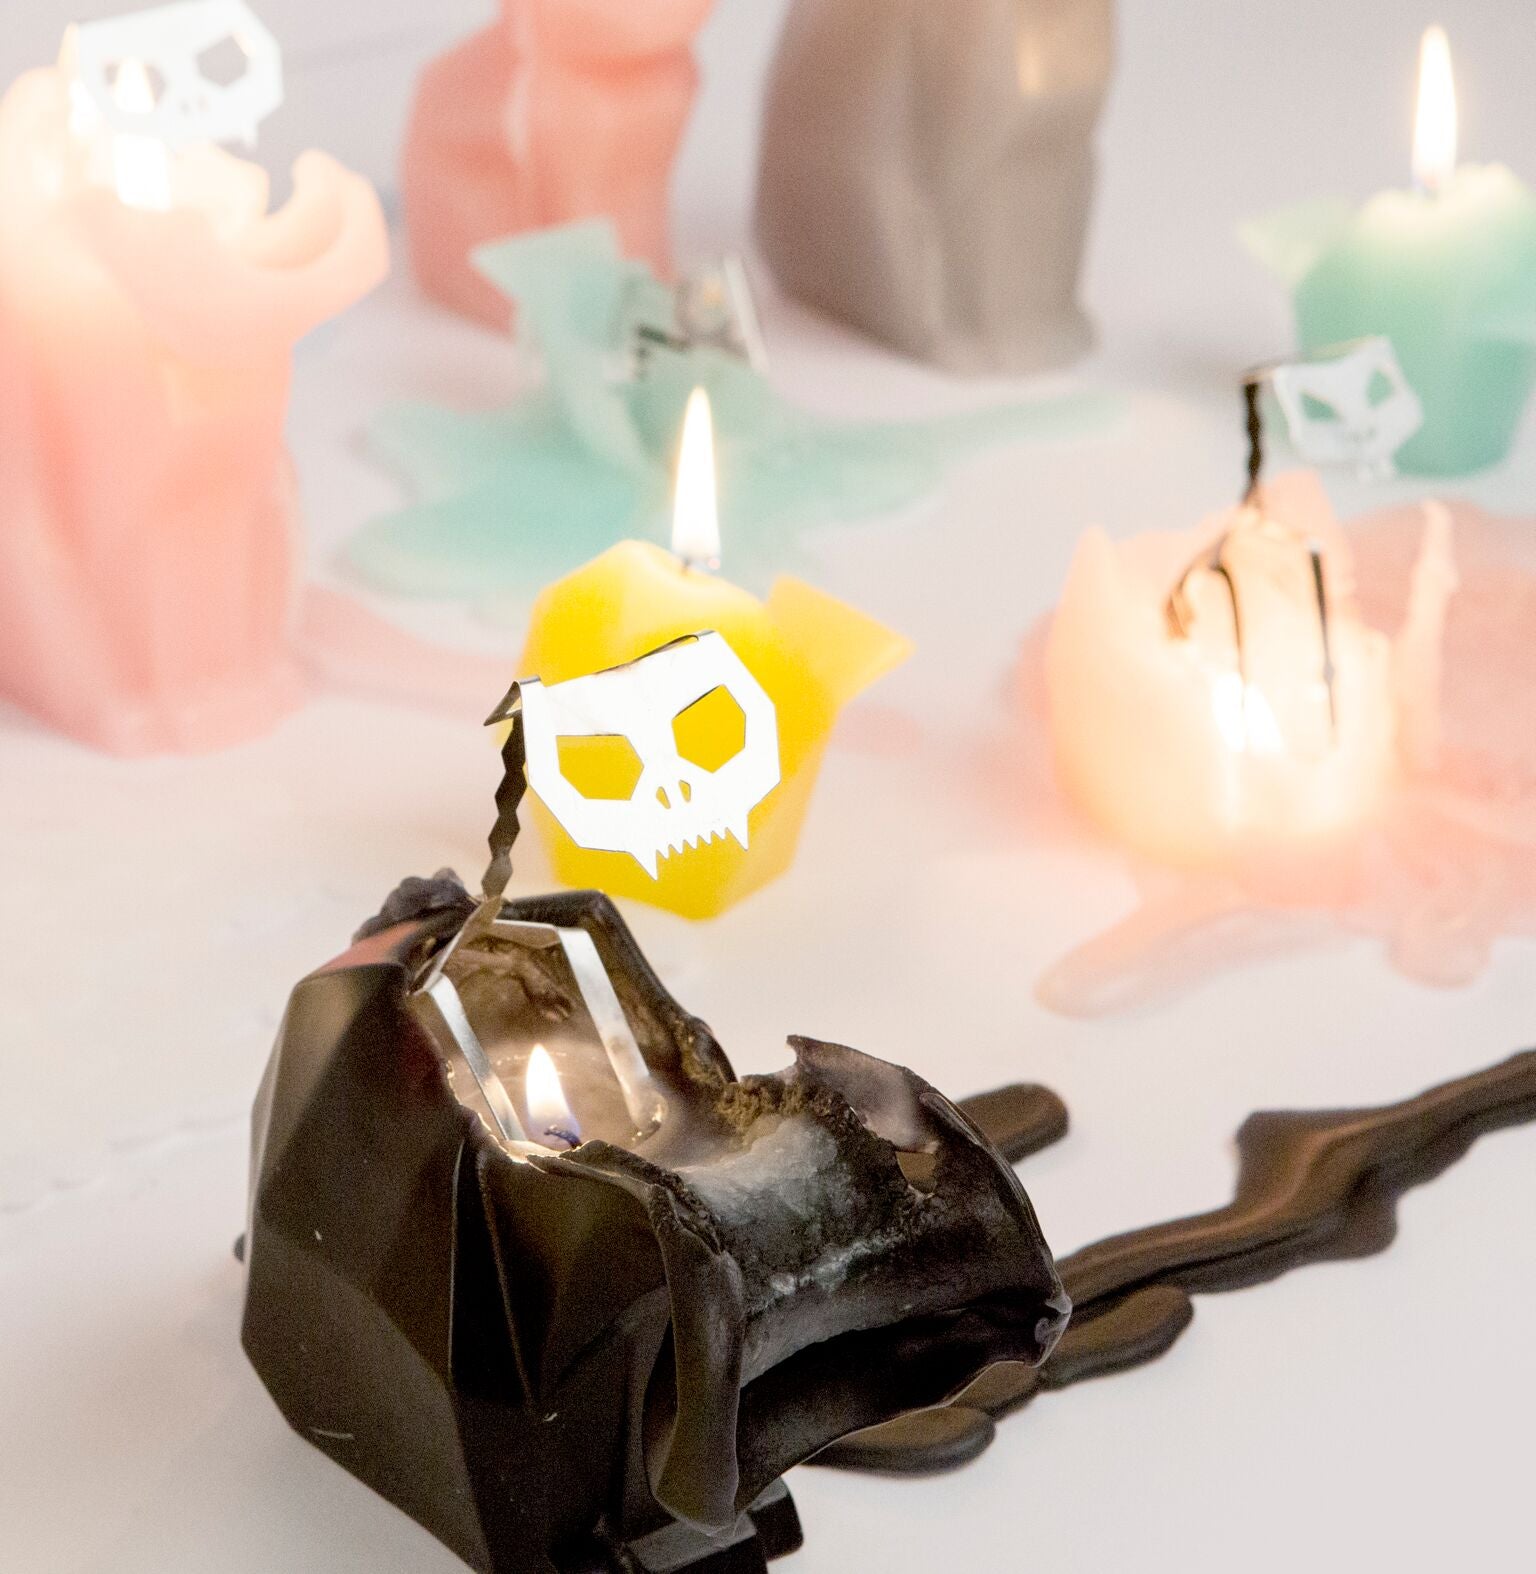 Pyropets featured as one of 10 Creepy Candles to Get you in the Halloween Mood